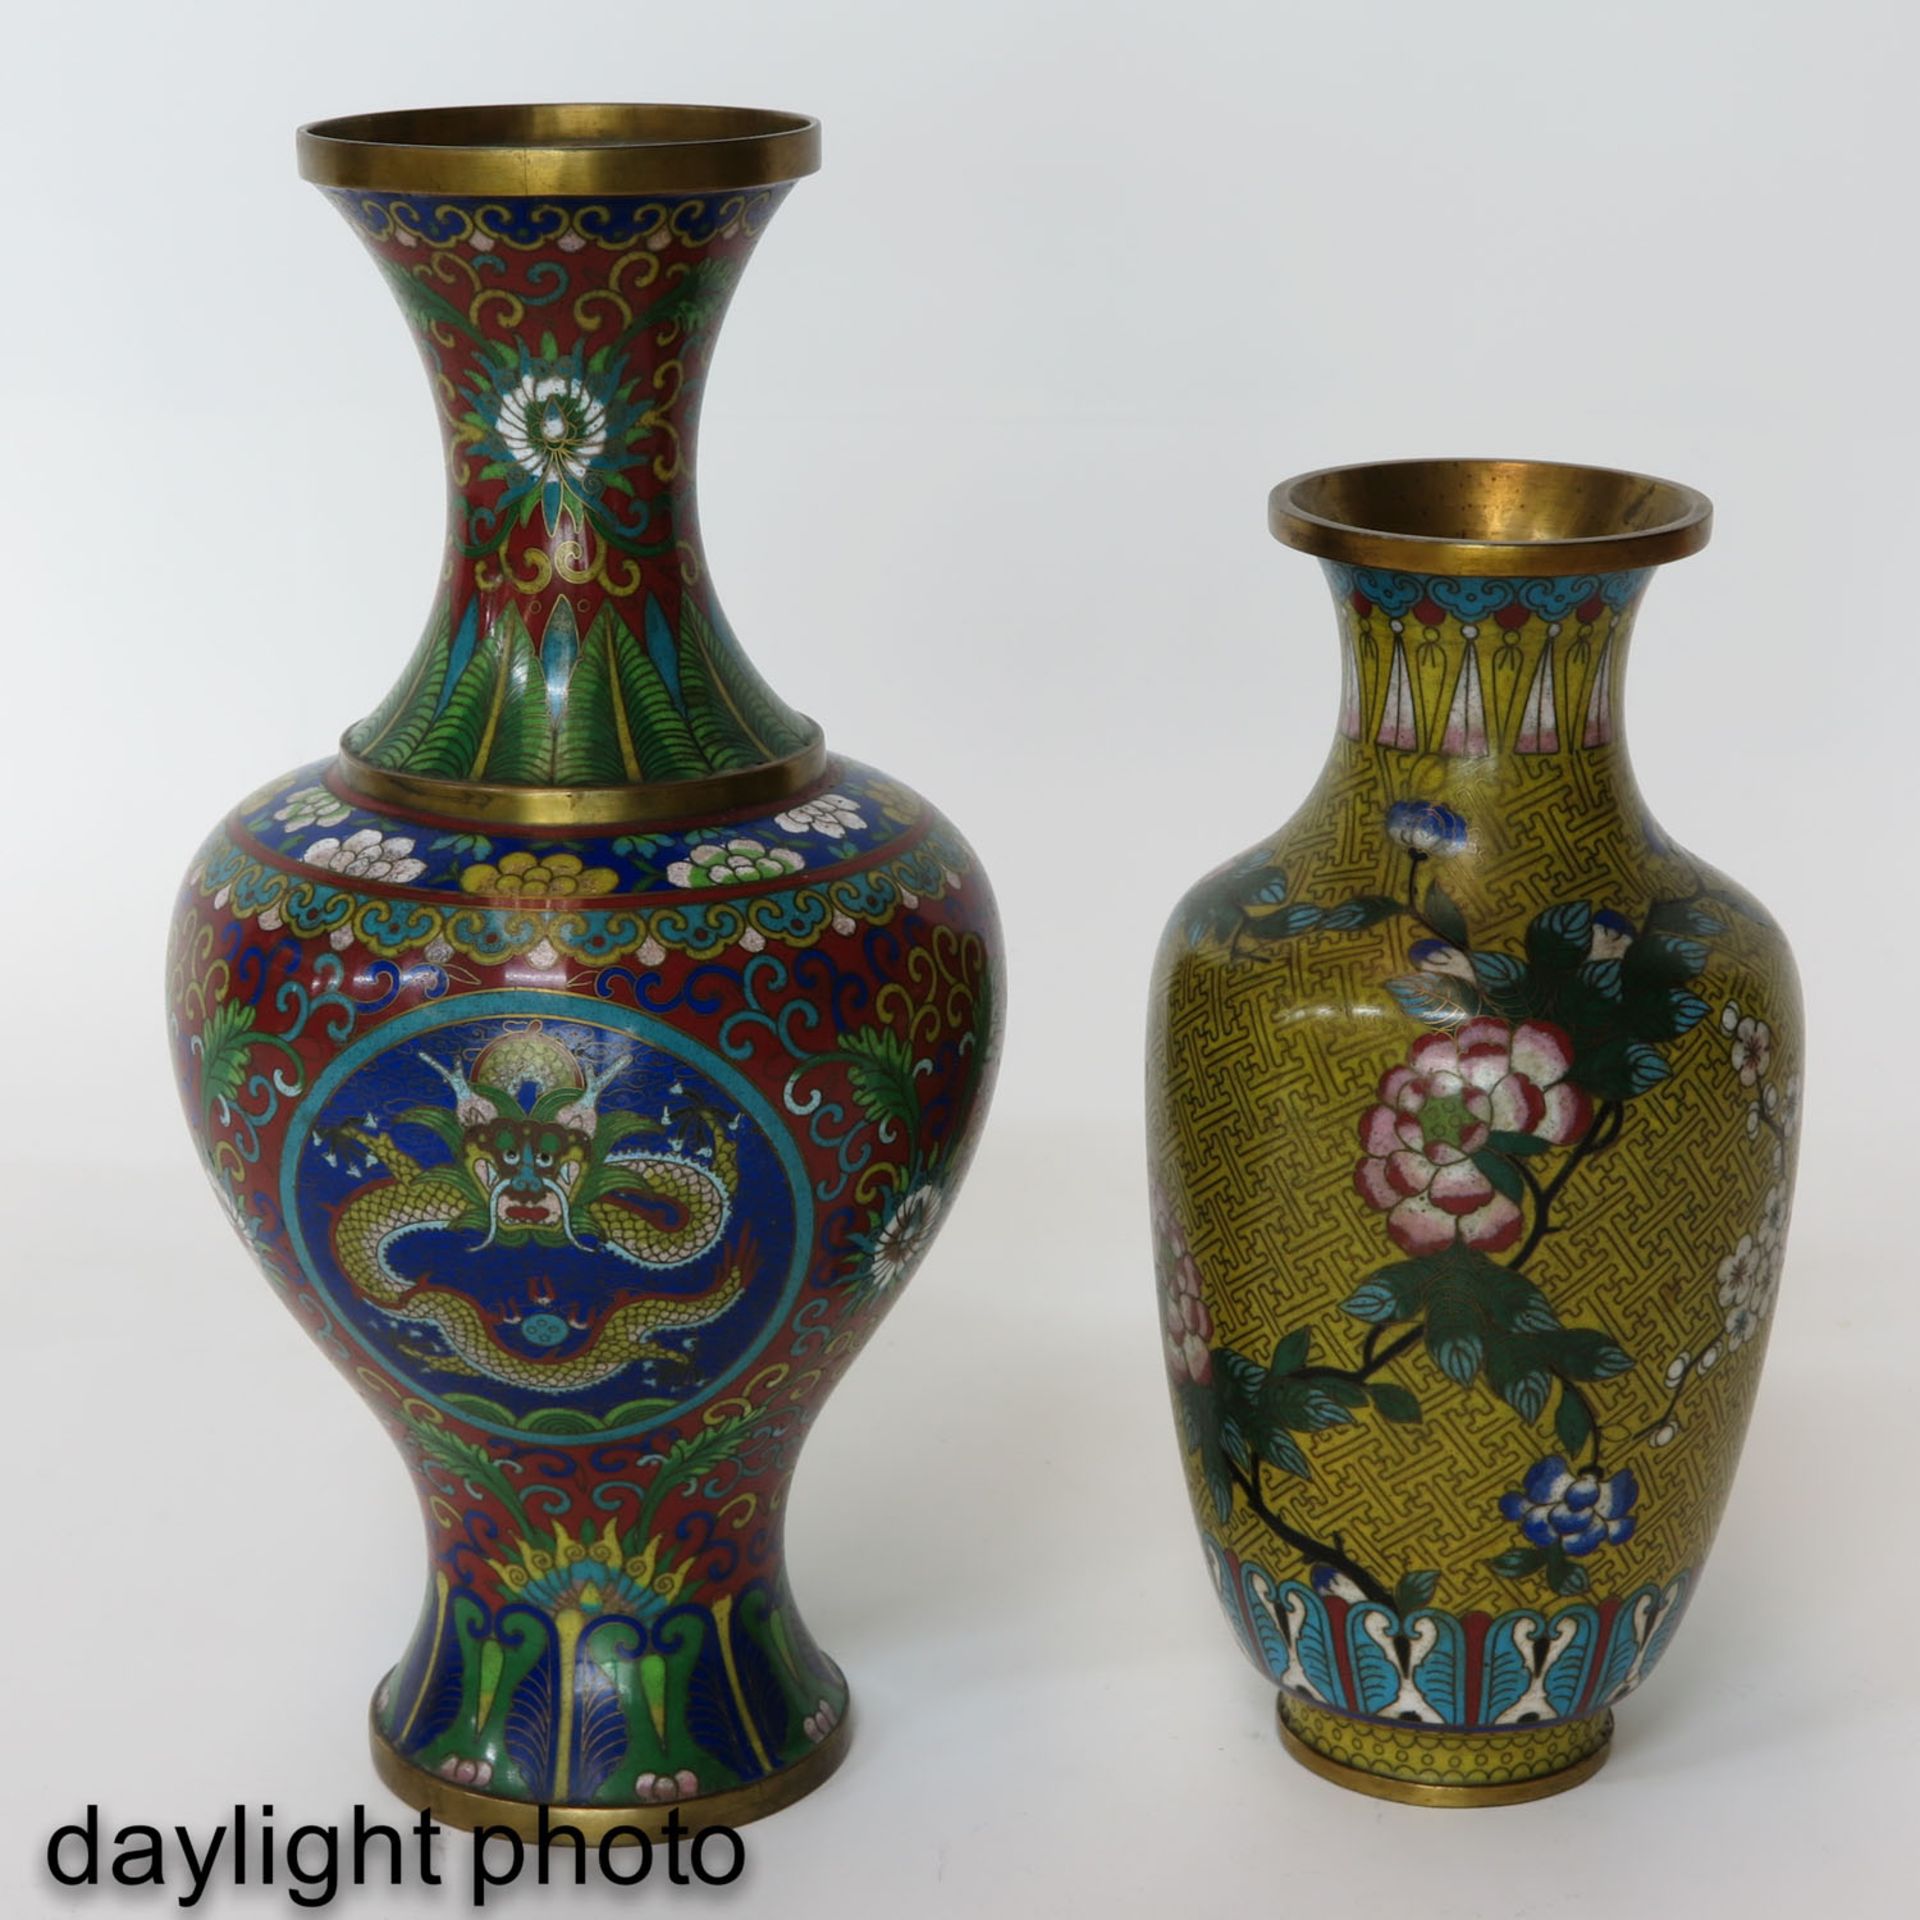 A Lot of 2 Cloisonne Vases - Image 7 of 9